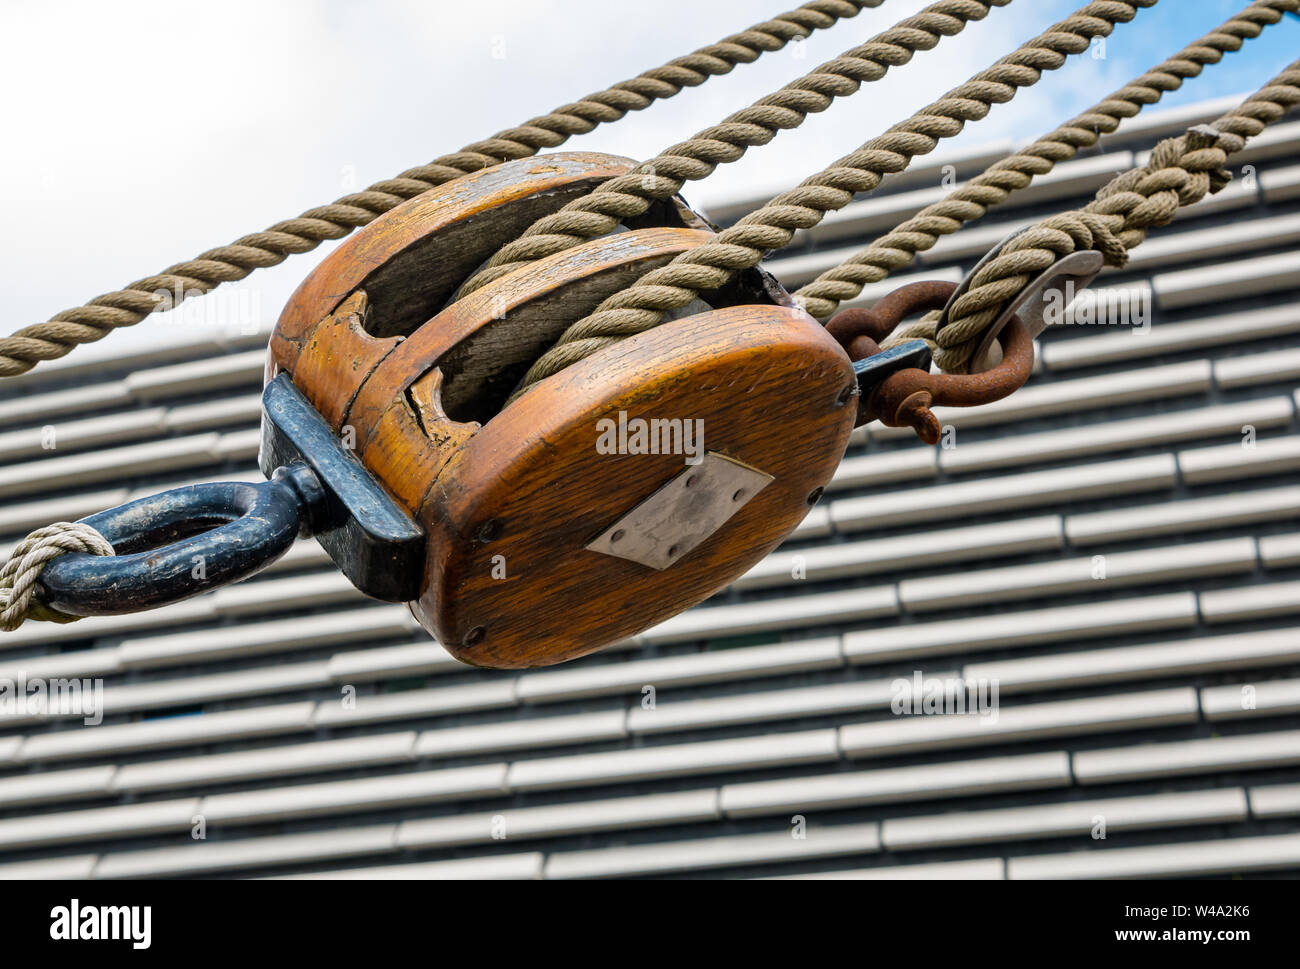 V&A Dundee museum & wooden sail rope block of ship's rigging, RSS Discovery ship, Riverside Esplanade, Dundee, Scotland, UK Stock Photo